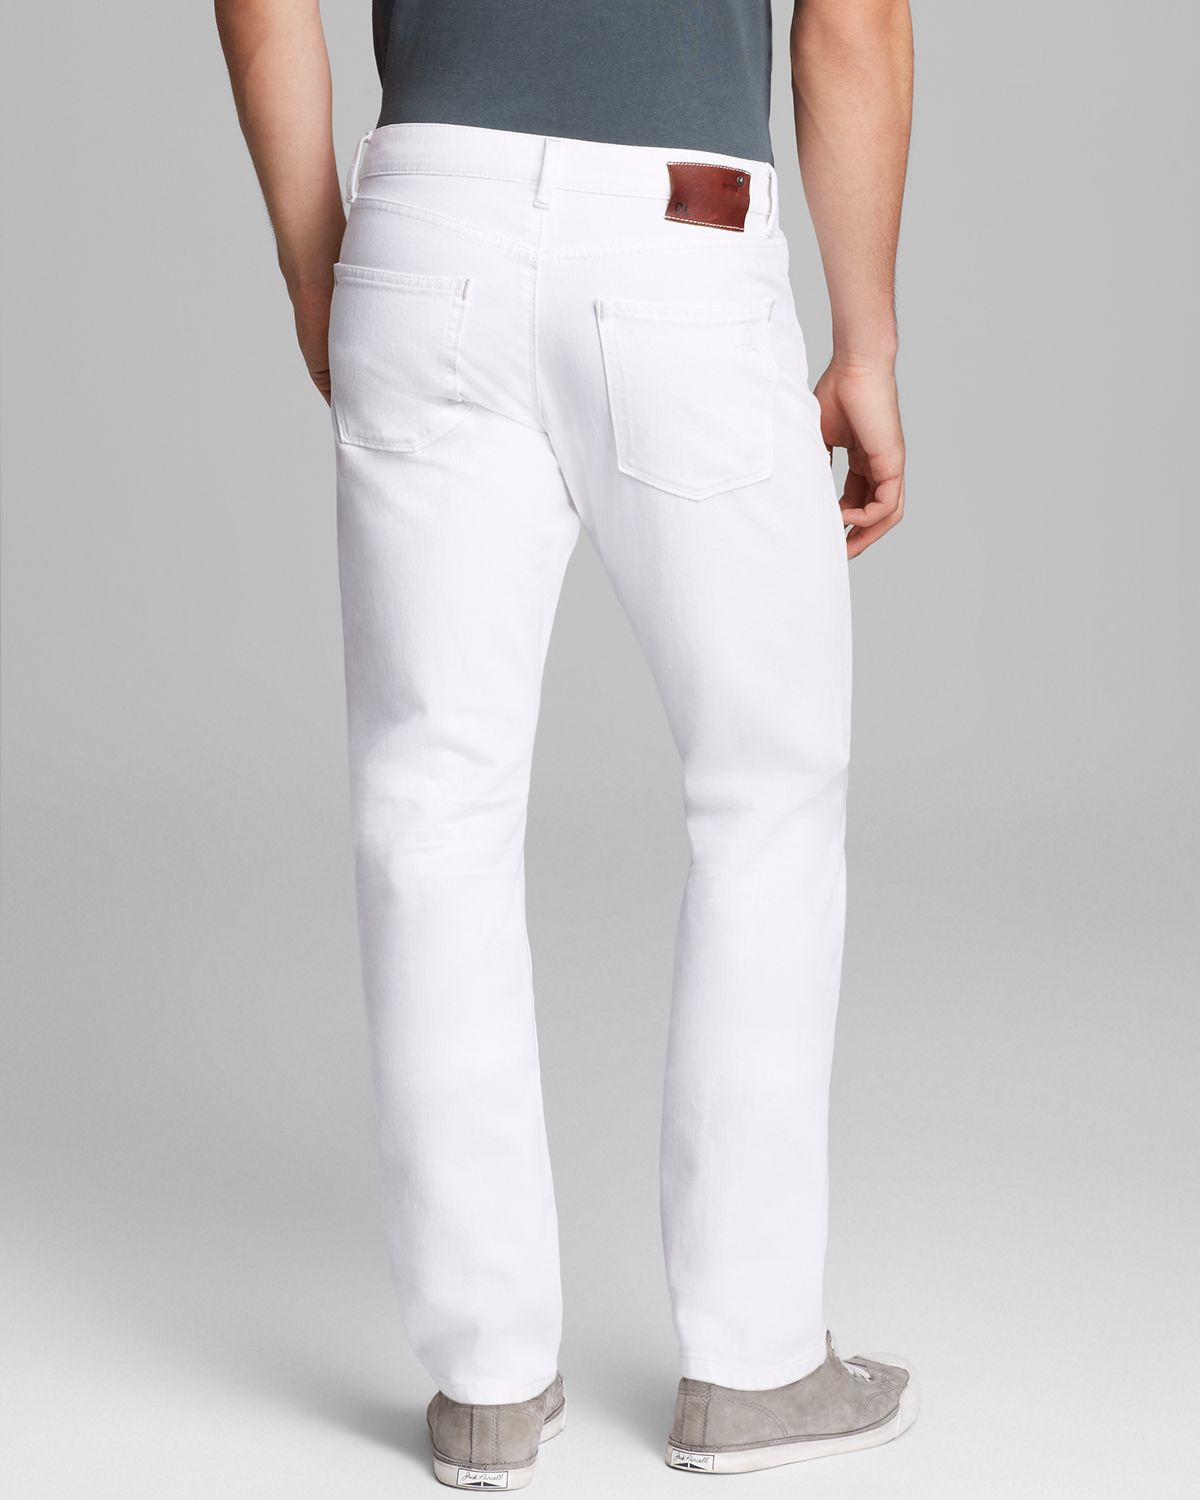 DL1961 Jeans Russell Slim Straight Fit in Chalk in White for Men - Lyst